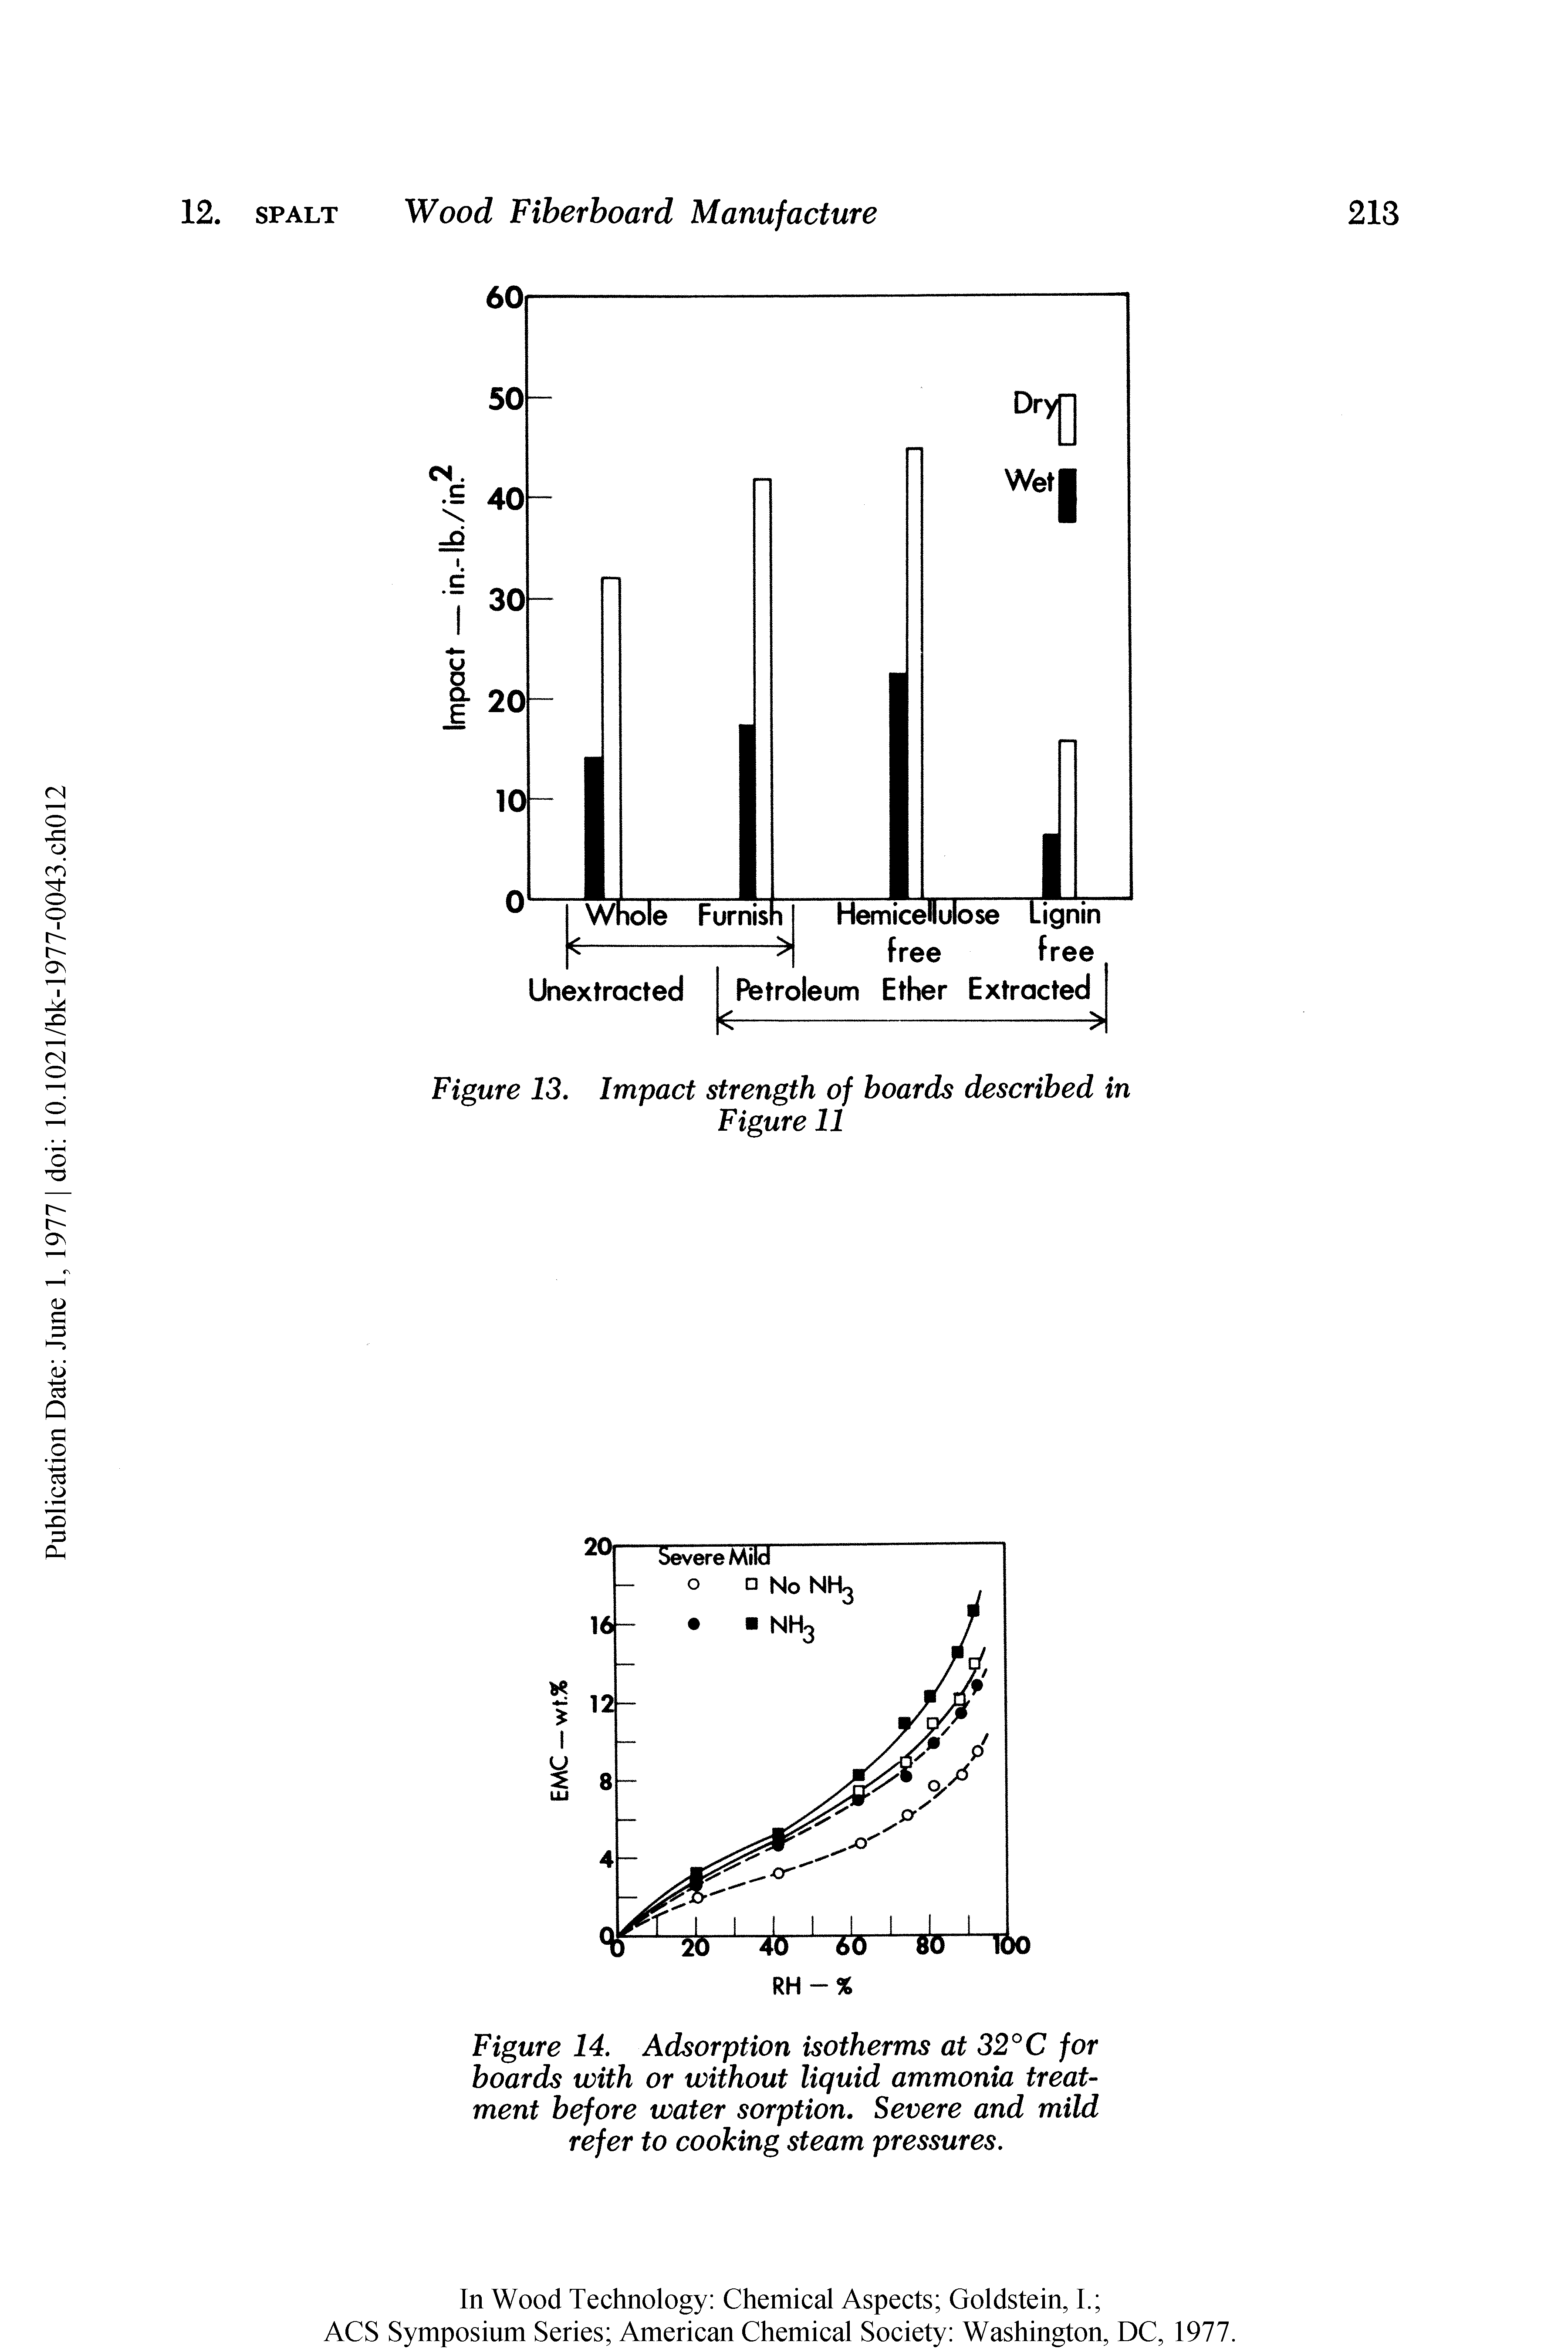 Figure 14. Adsorption isotherms at 32° C for boards with or without liquid ammonia treatment before water sorption. Severe and mild refer to cooking steam pressures.